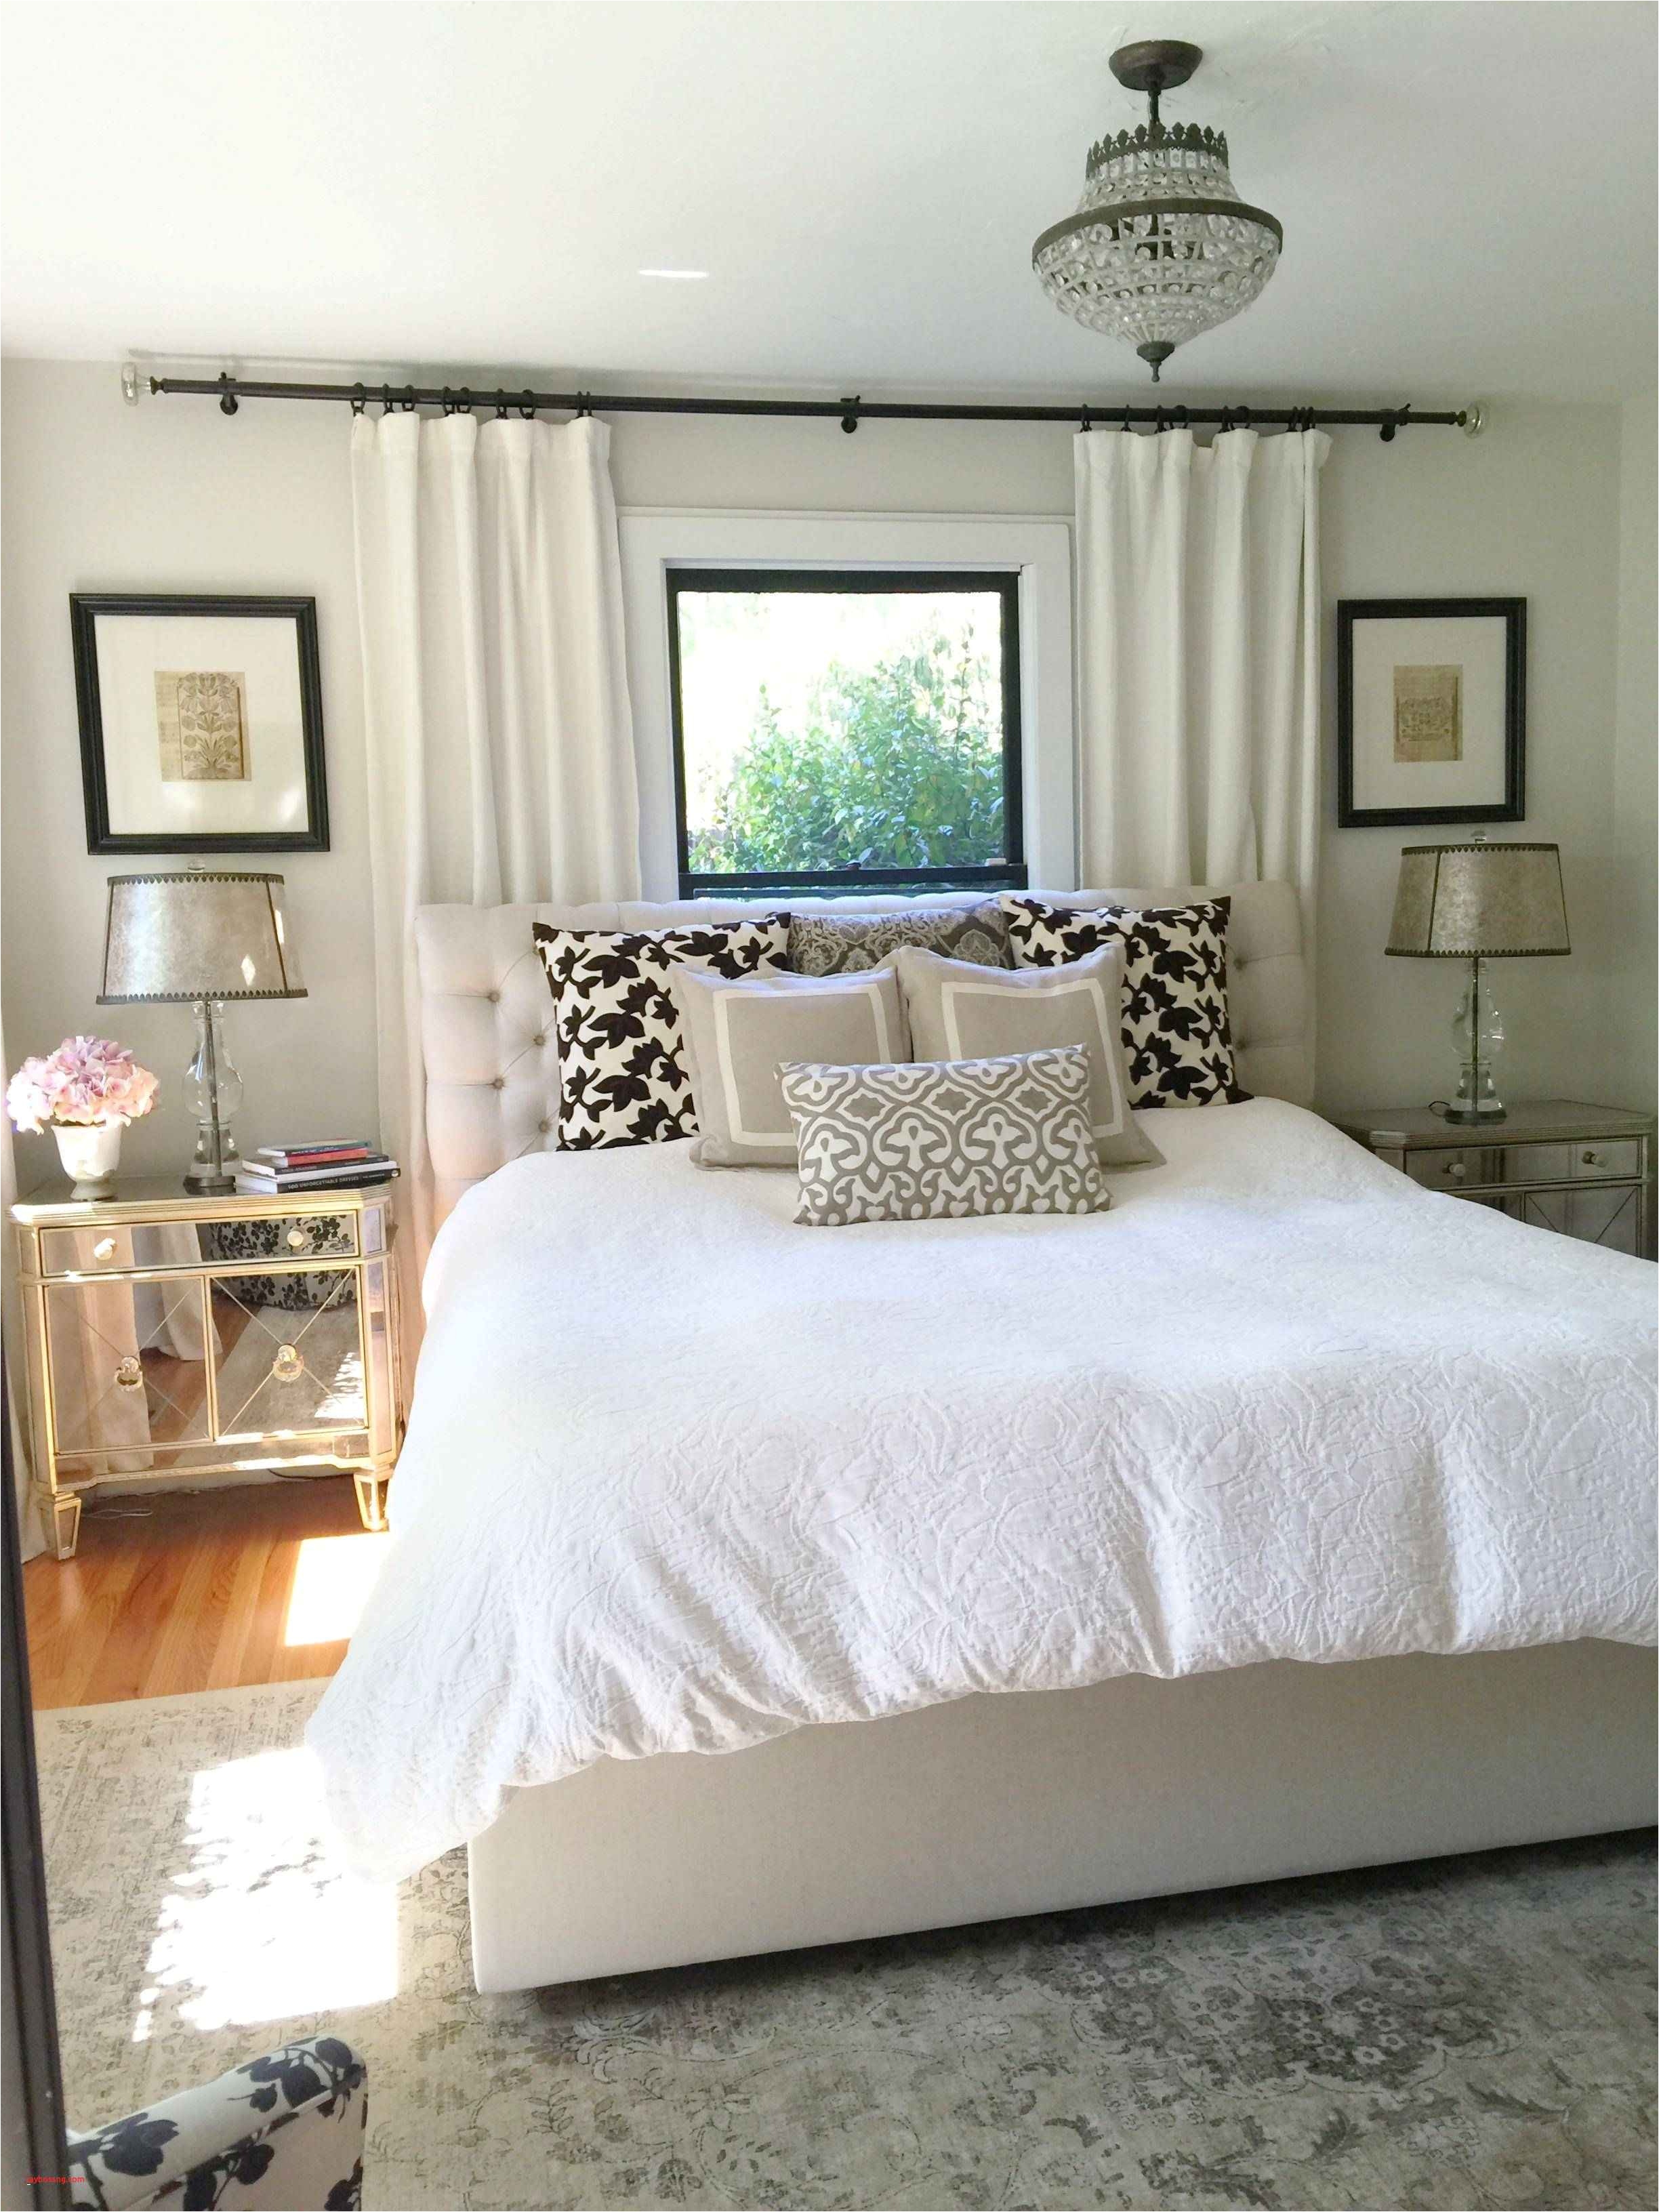 awesome bedroom ideas awesome full size of bedroom ideas white twin beds unique furniture storage